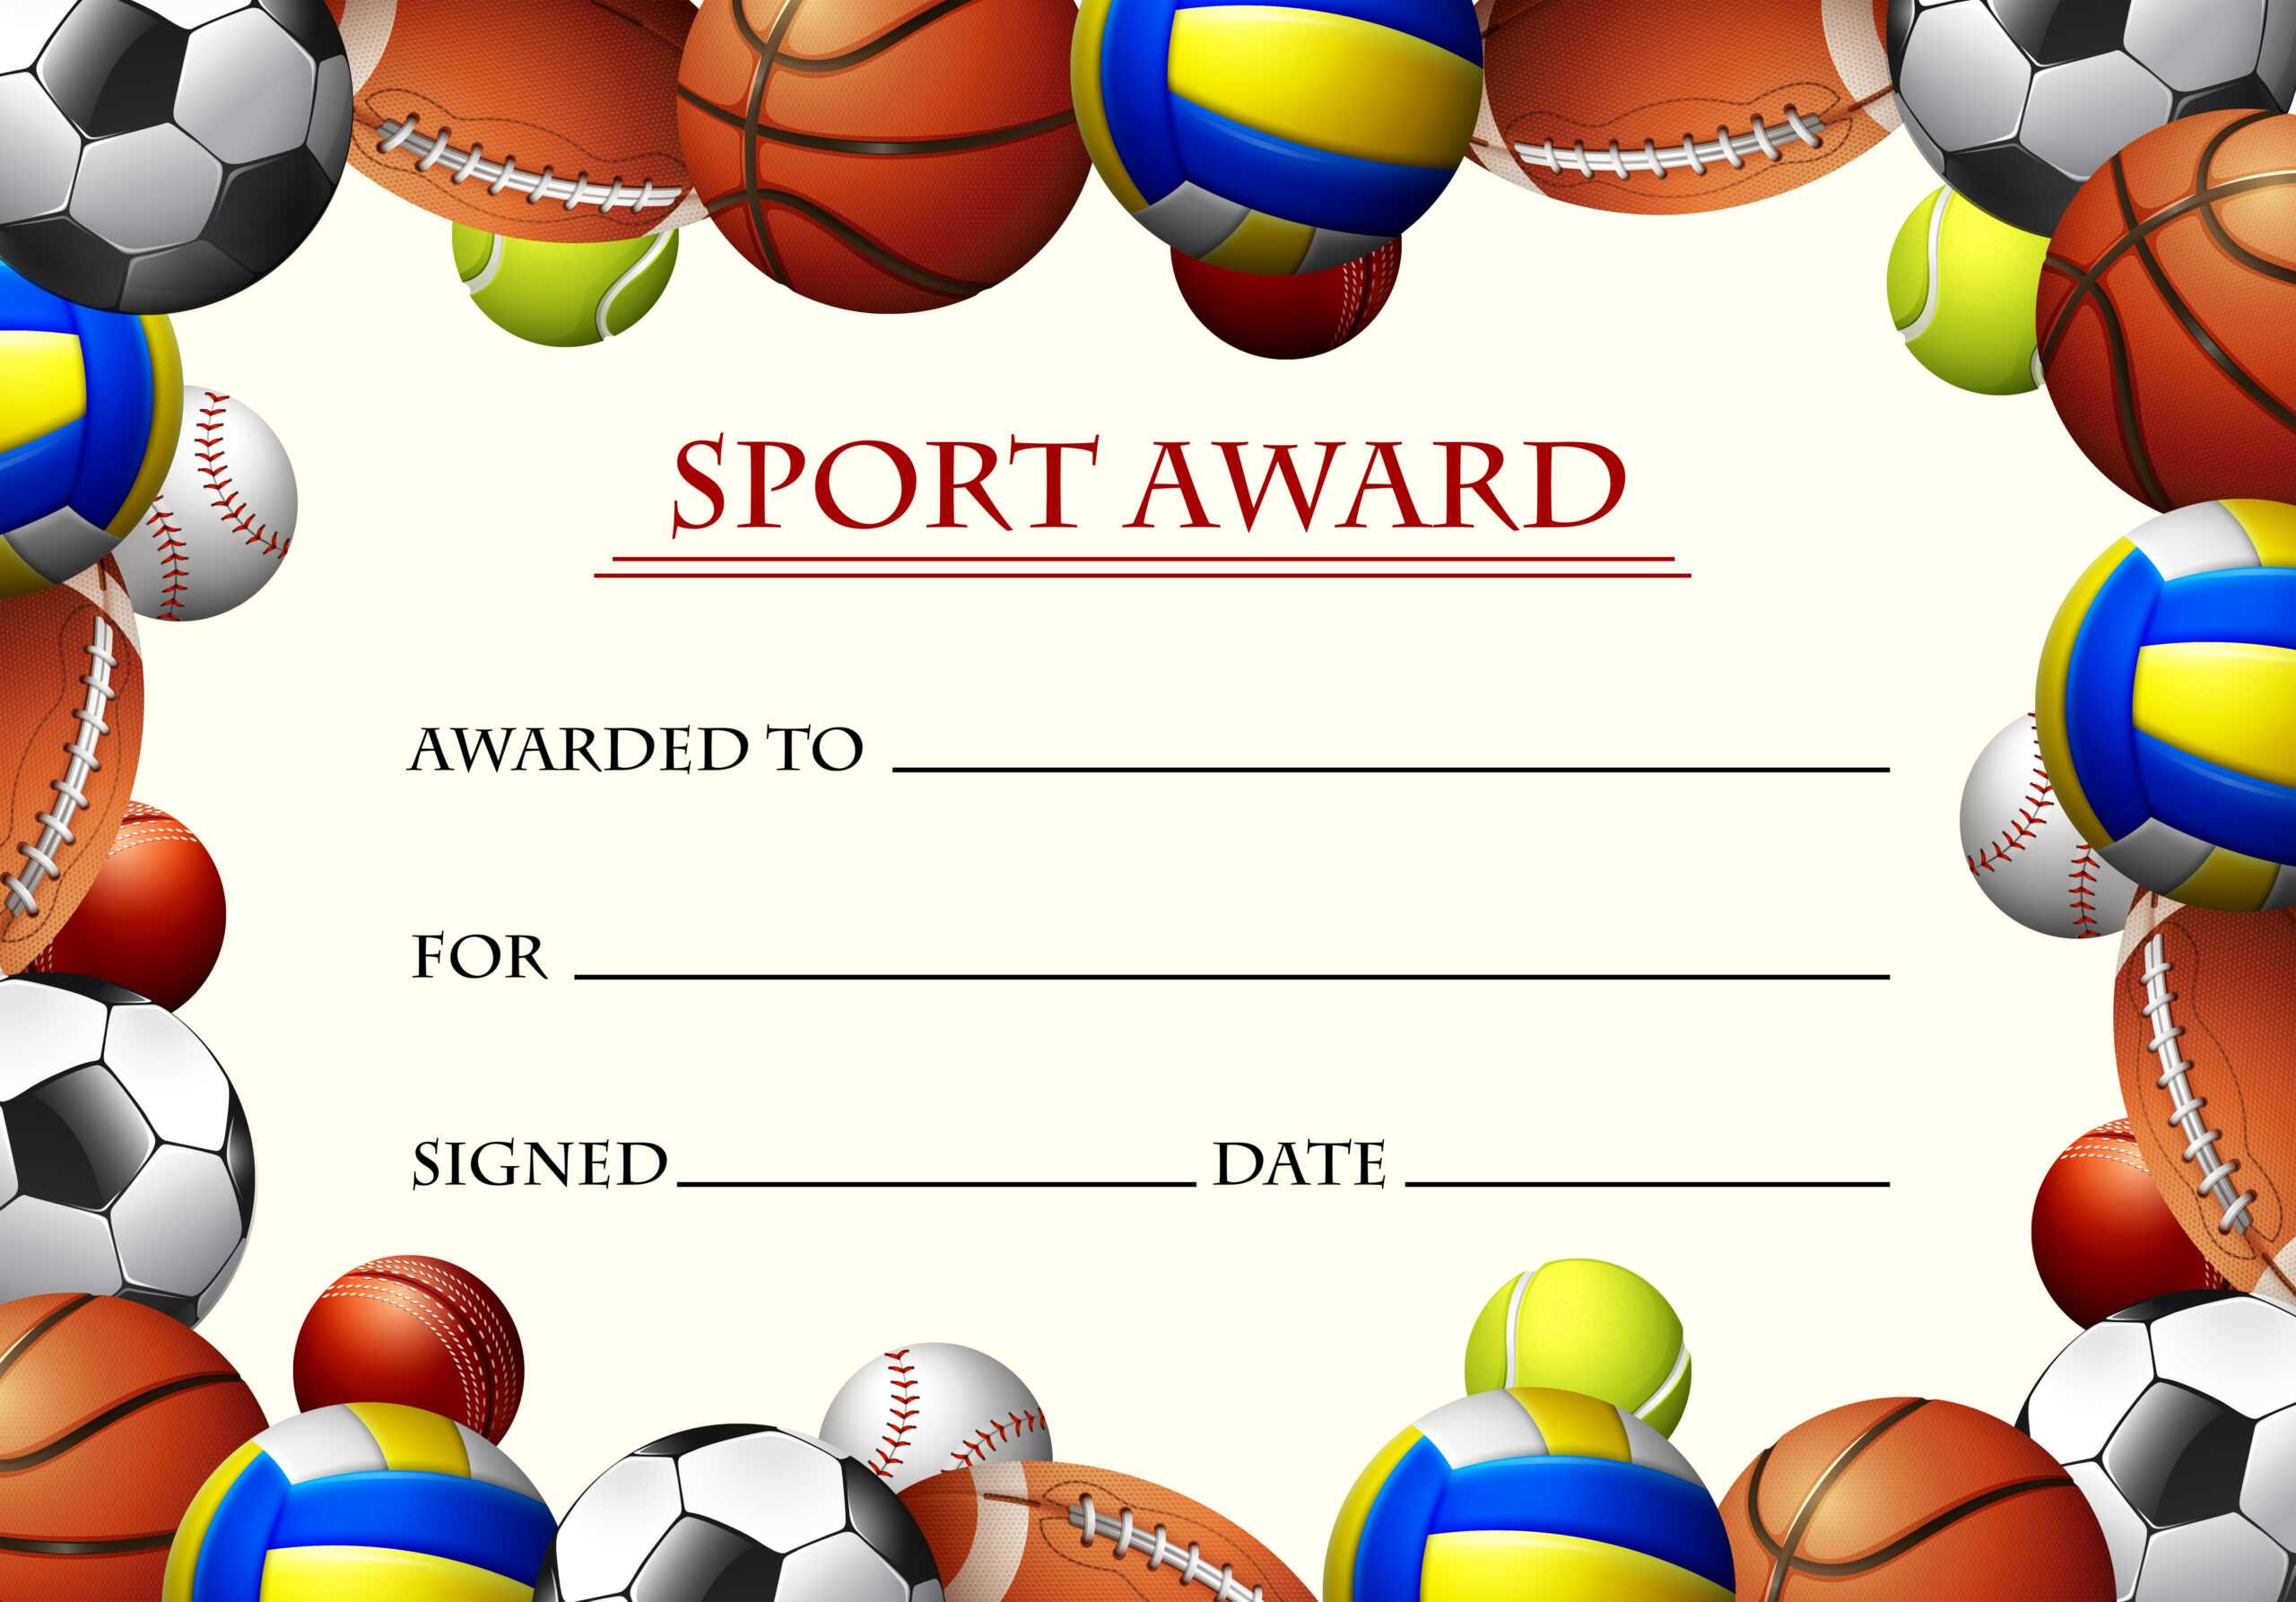 Certificate Template For Sport Award – Download Free Vectors With Regard To Sports Day Certificate Templates Free